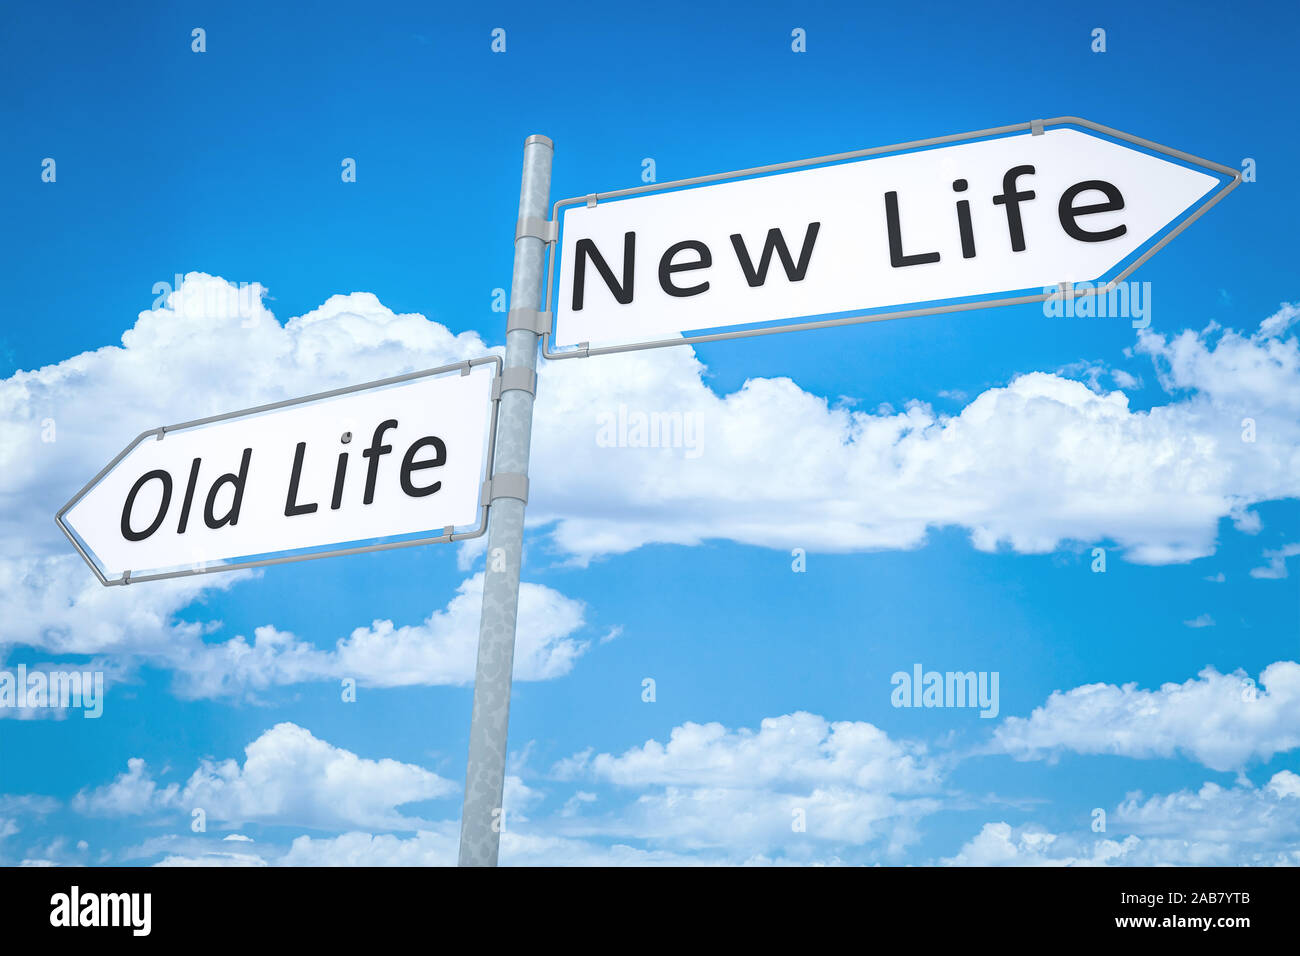 Find new life